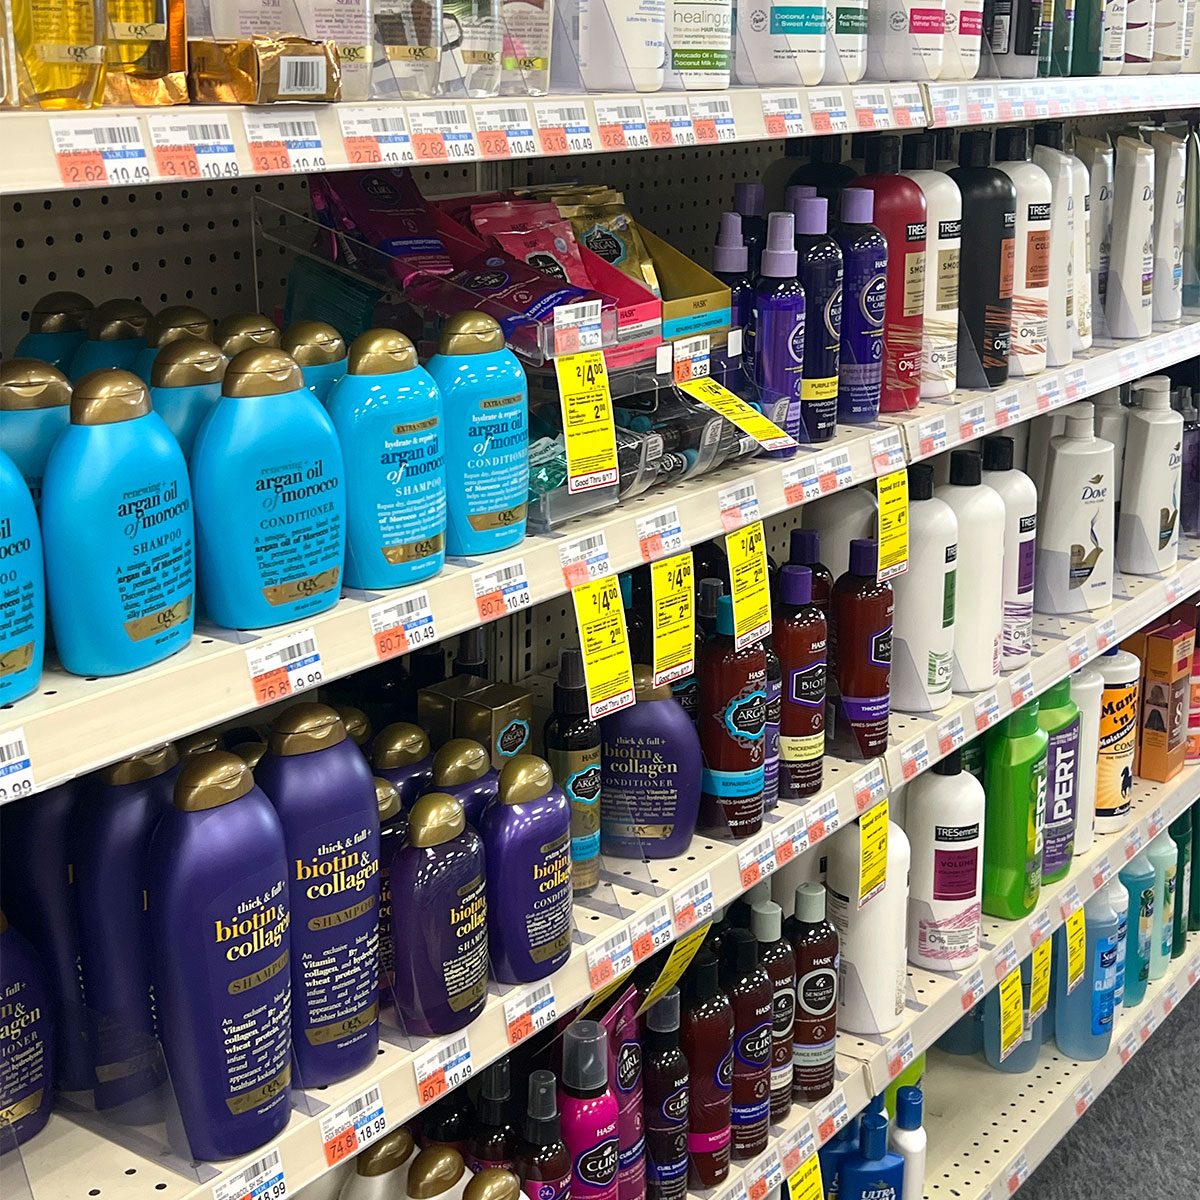 shampoo haircare products lined up drugstore shelf